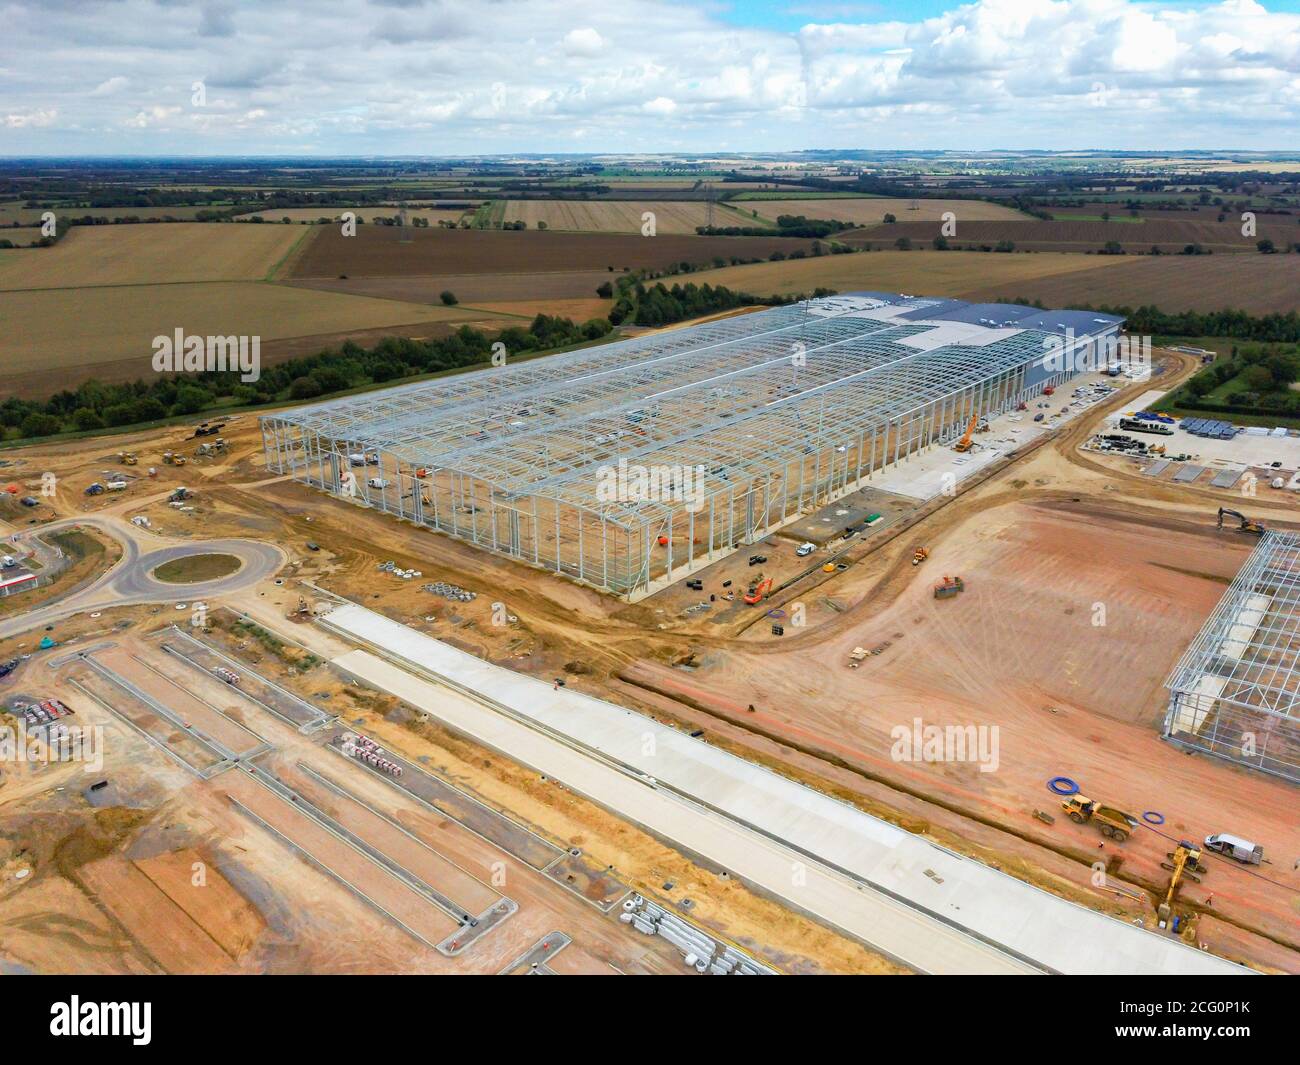 Construction is well underway in September 2020 of the Co-op food group new regional distribution centre at Symmetry Park, Biggleswade, Bedfordshire, UK The main framework for the warehouse hub of 661,000 sq ft seen here from the air. Stock Photo